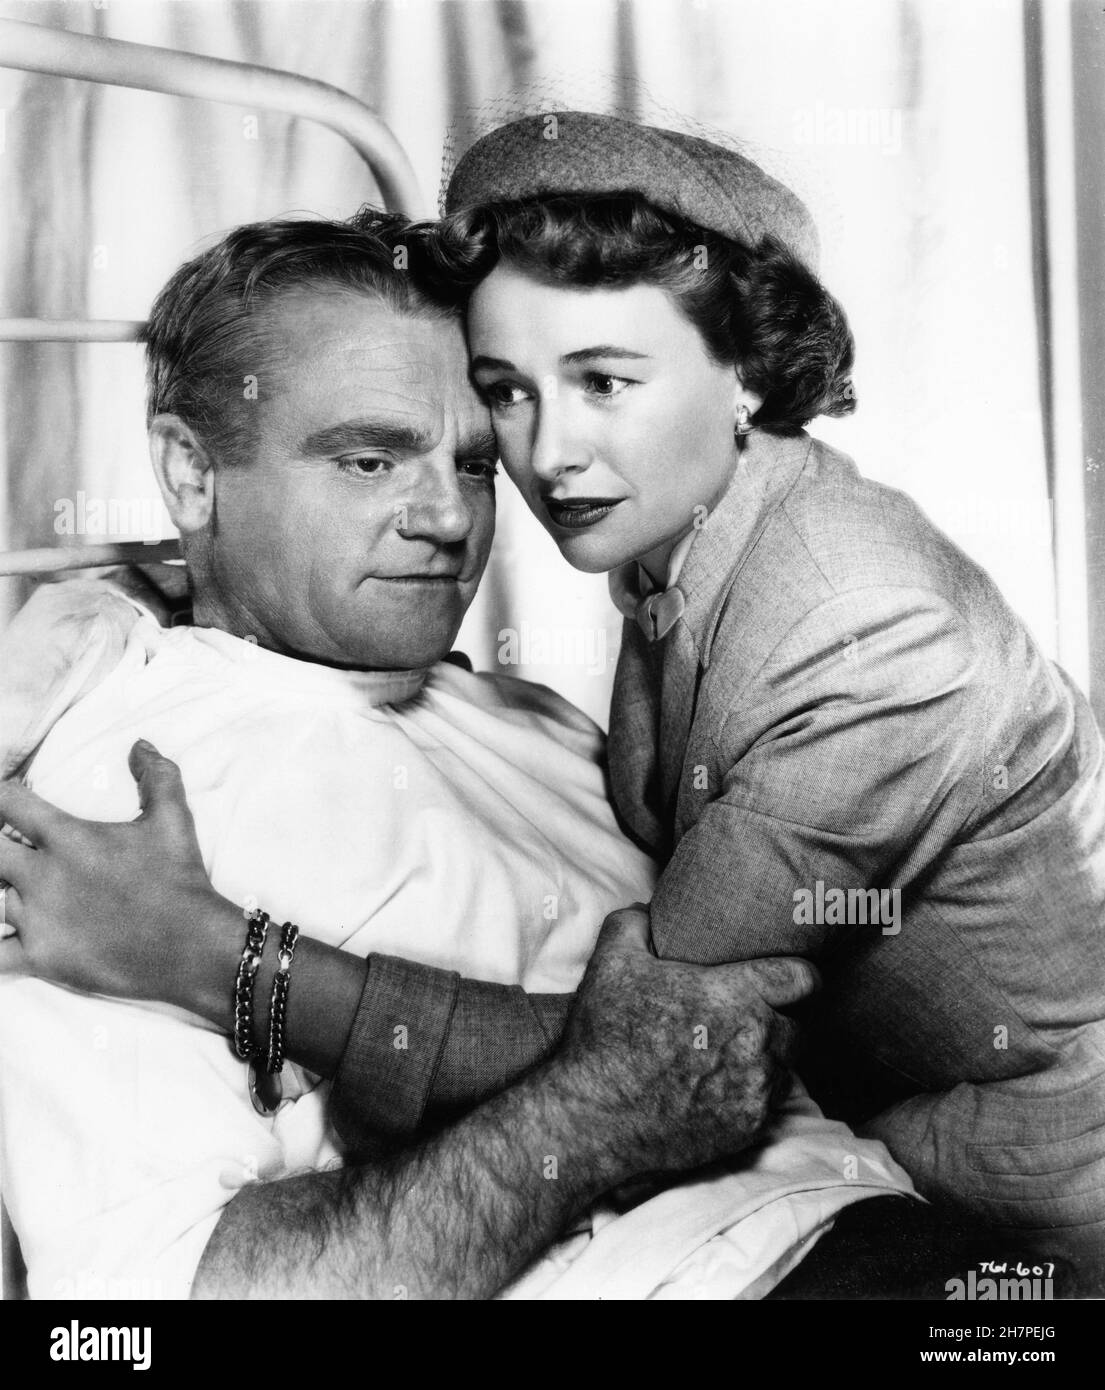 JAMES CAGNEY and PHYLLIS THAXTER in COME FILL THE STOP 1951 director GORDON DOUGLAS novel Harlan Ware cinematography Robert Burks producer Henry Blanke Warner Bros. Stock Photo